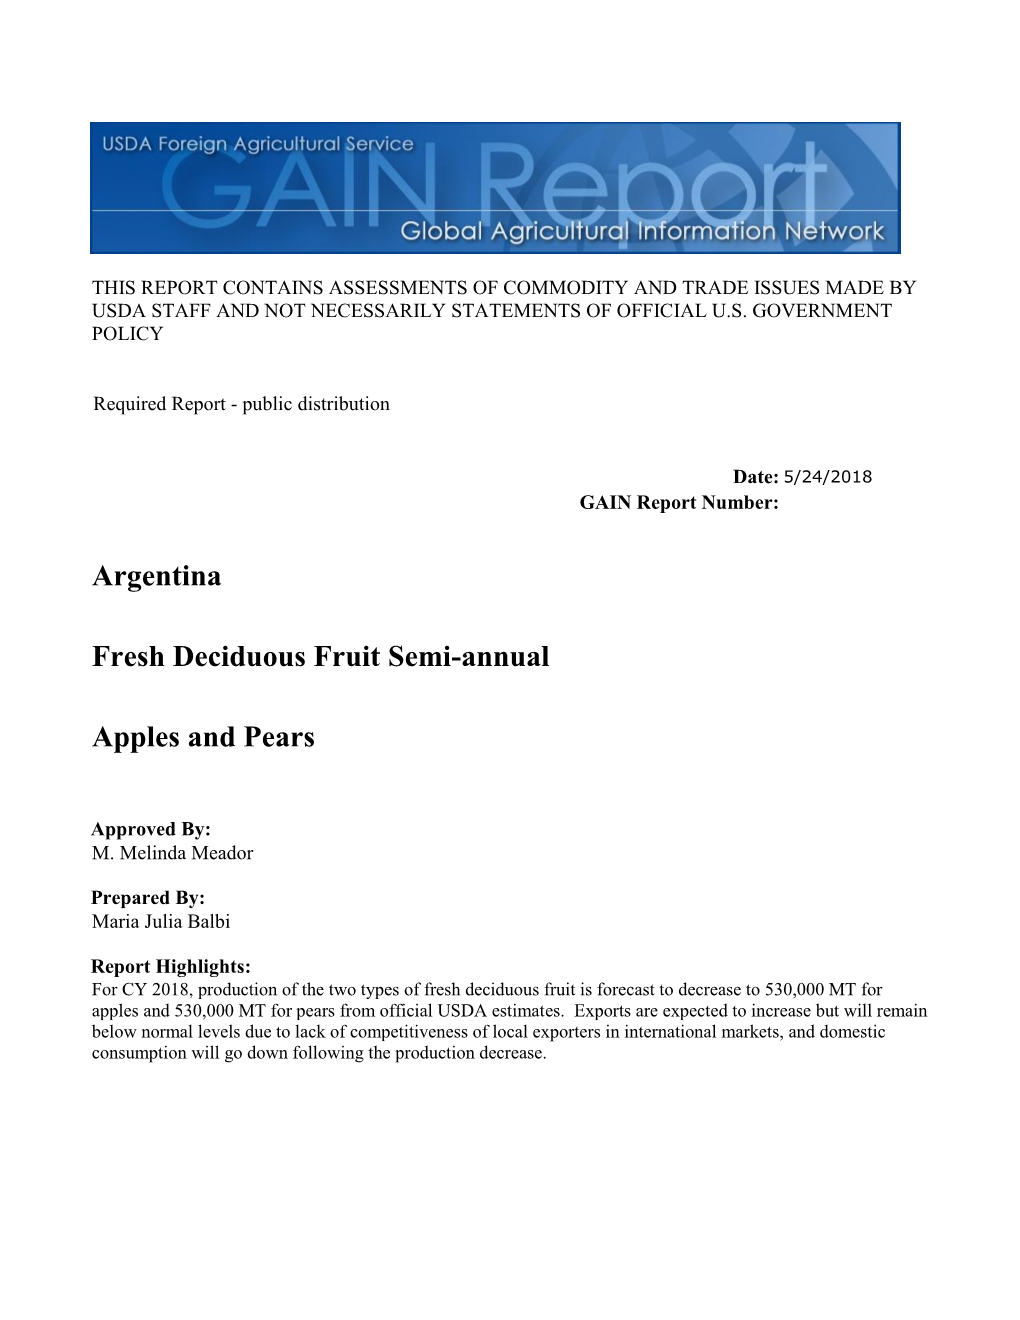 Apples and Pears Fresh Deciduous Fruit Semi-Annual Argentina